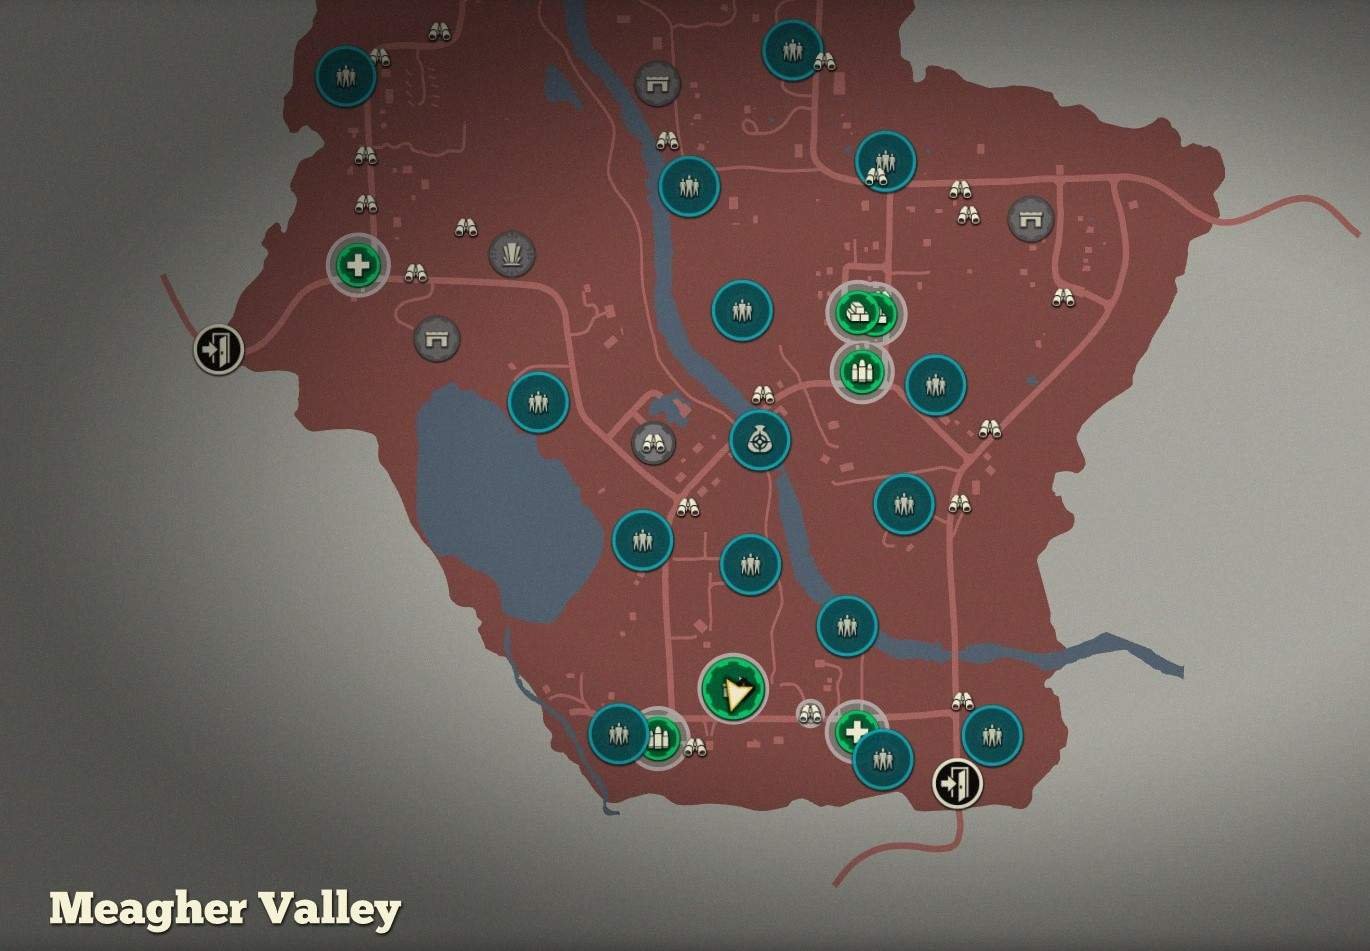 state of decay 2 mod locations